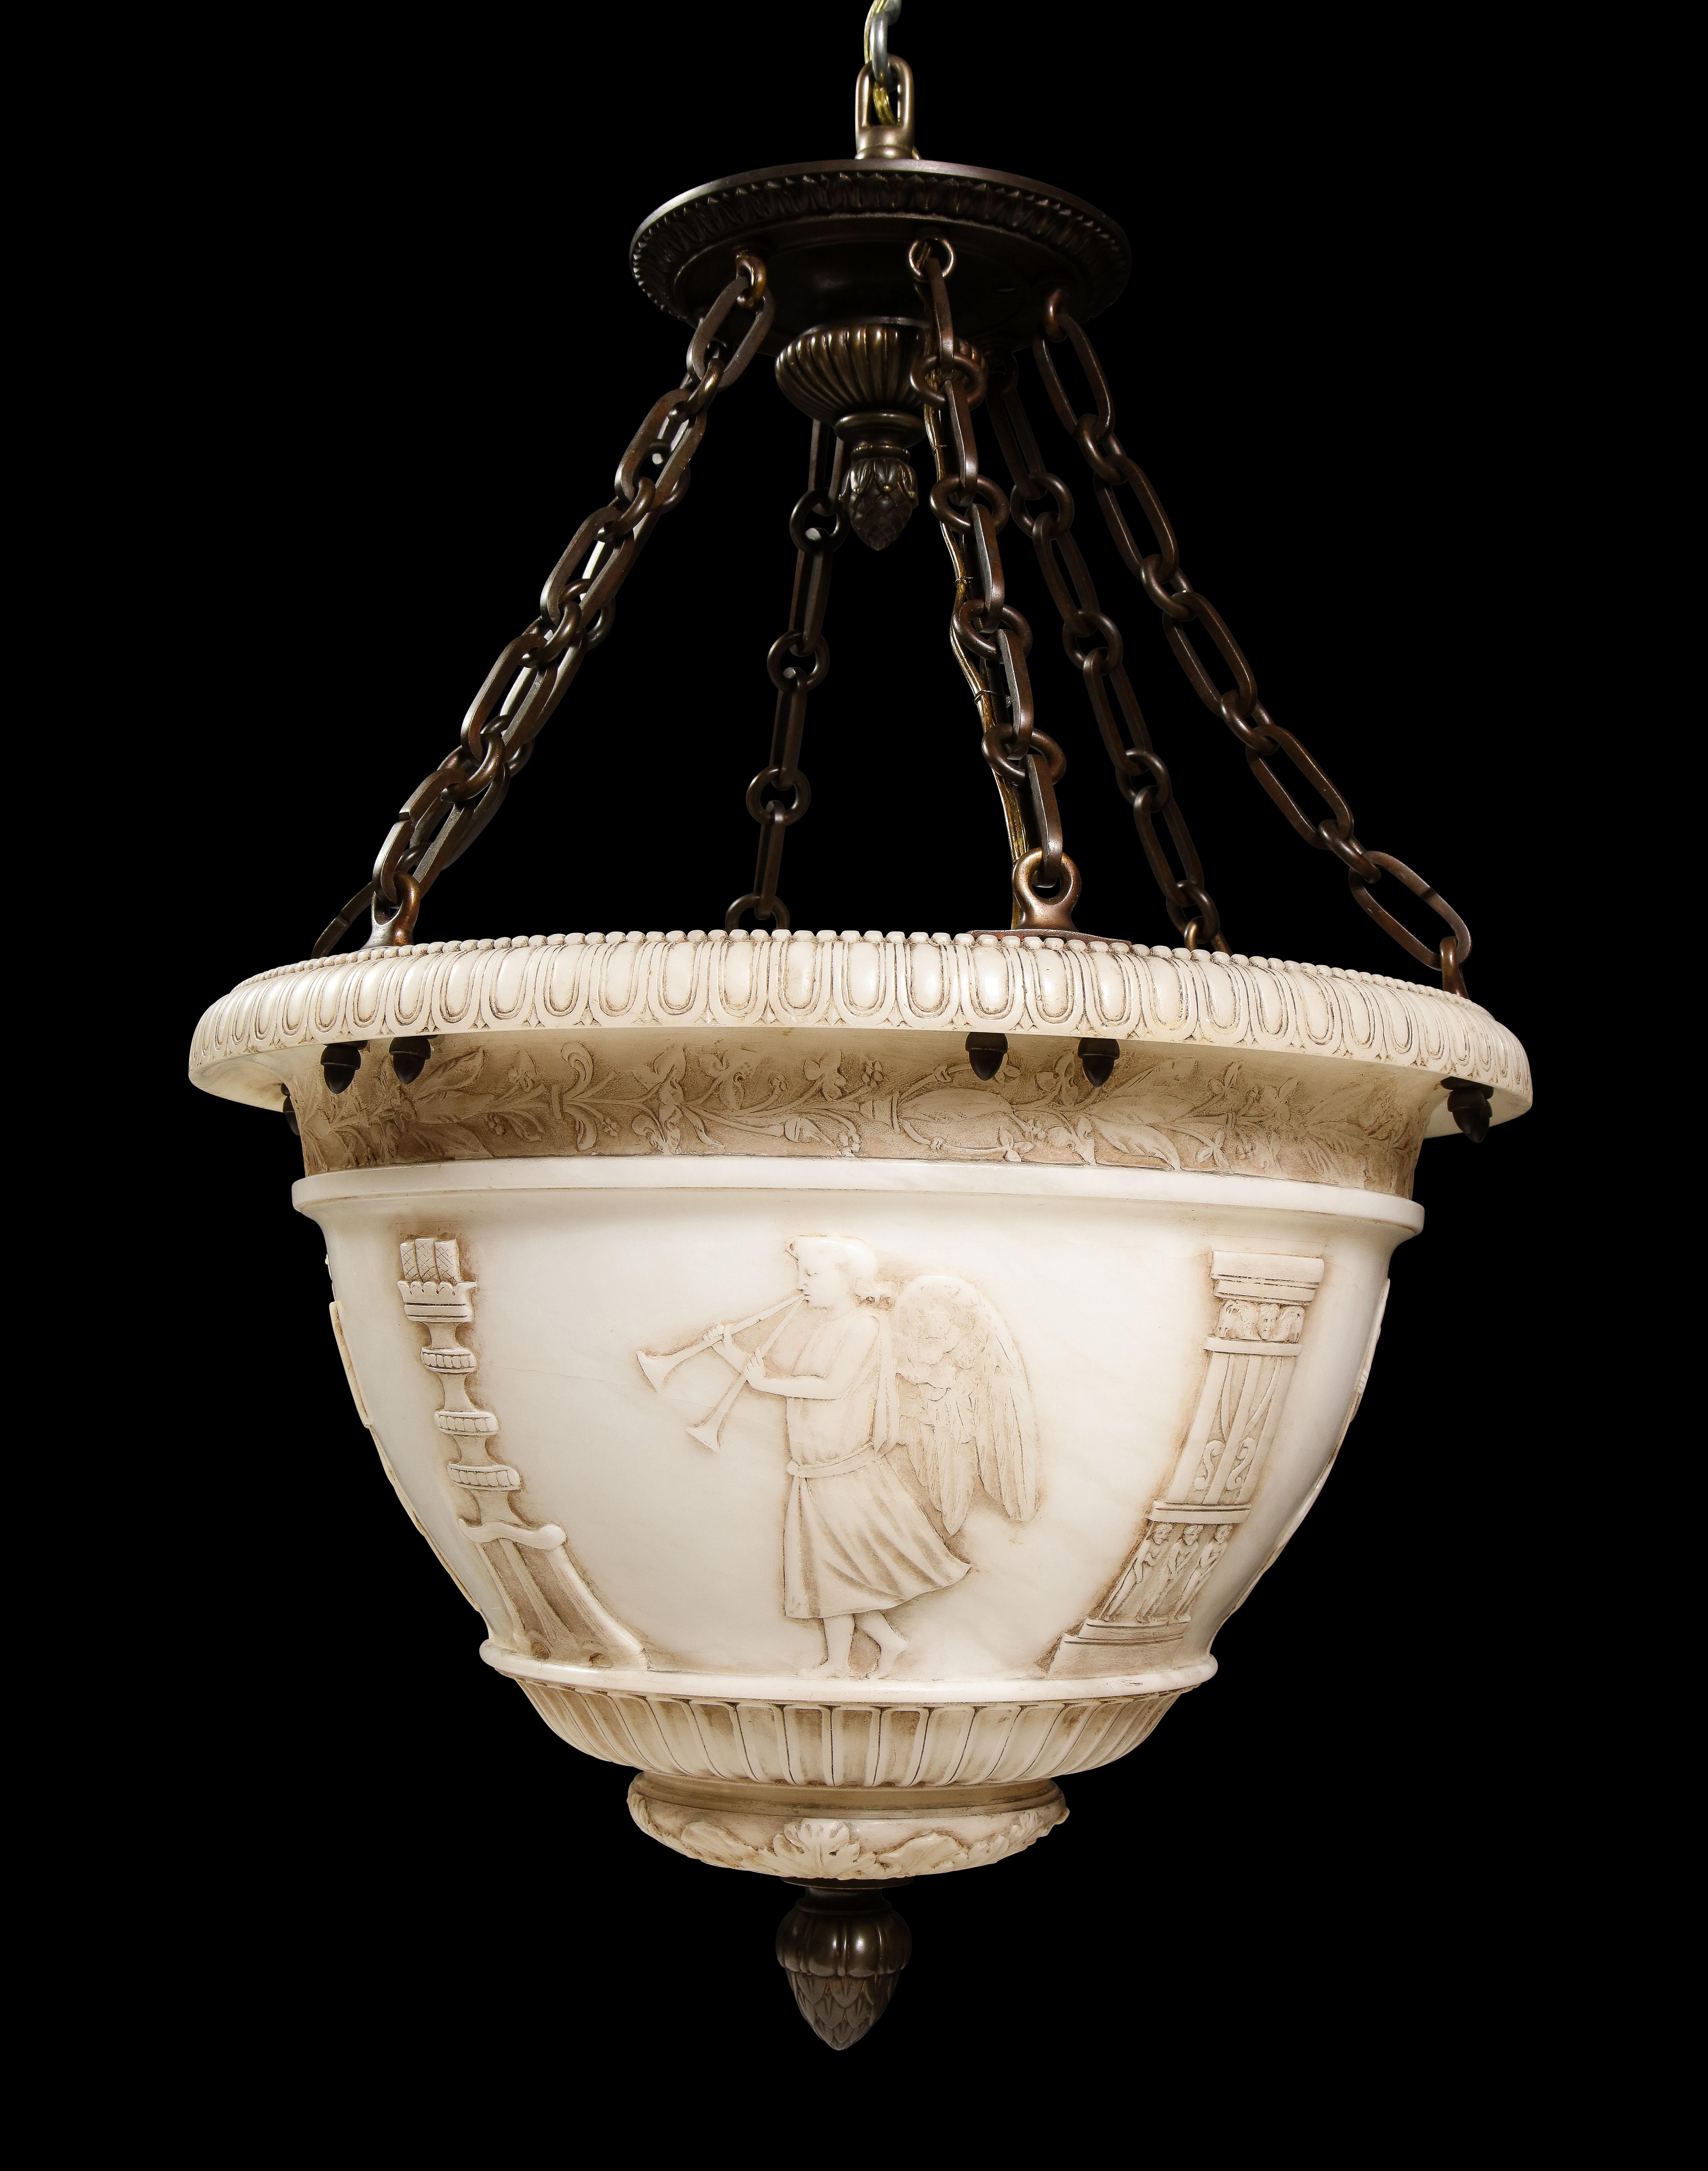 A fine antique French neoclassical style carved alabaster and patinated bronze chandelier of fine detail embellished with neoclassical figures in relief playing musical instruments.